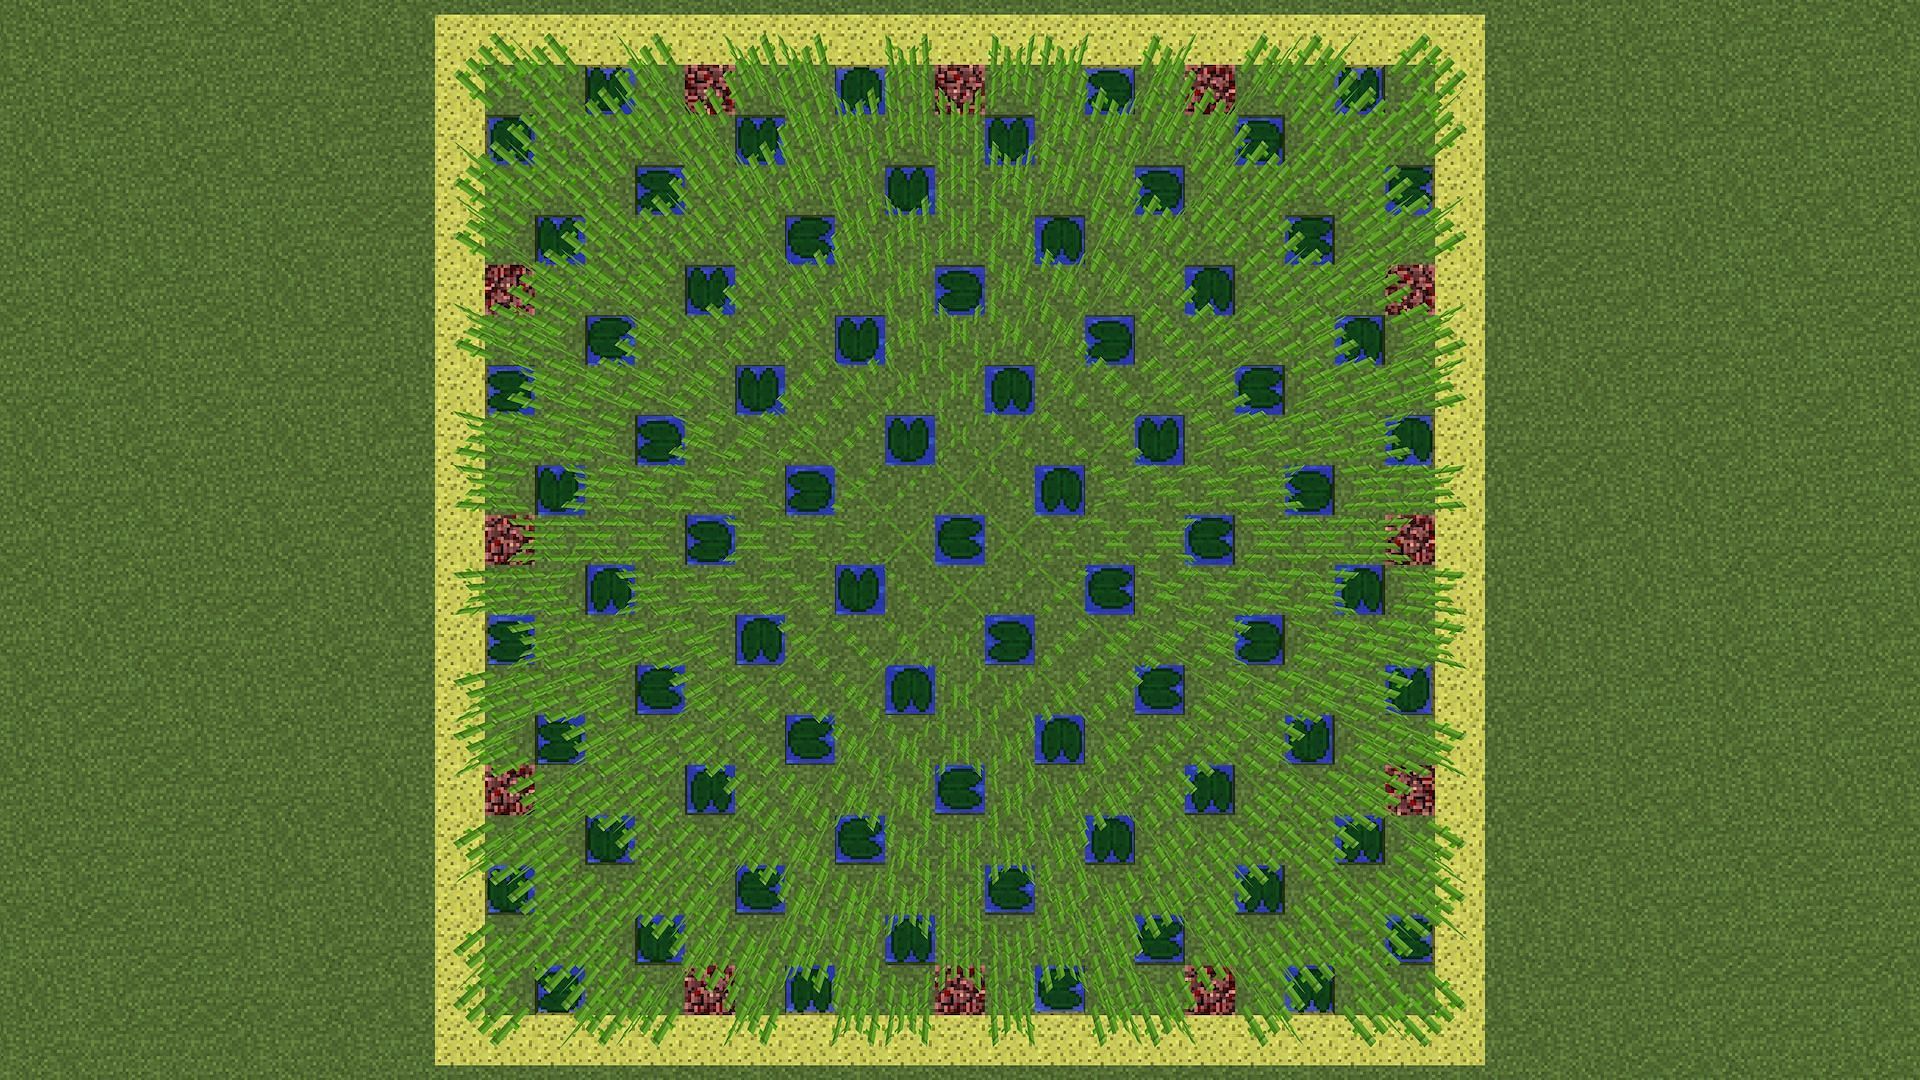 Using a checkerboard pattern can produce more yield in the same area (Image via minecraft.fandom.com)